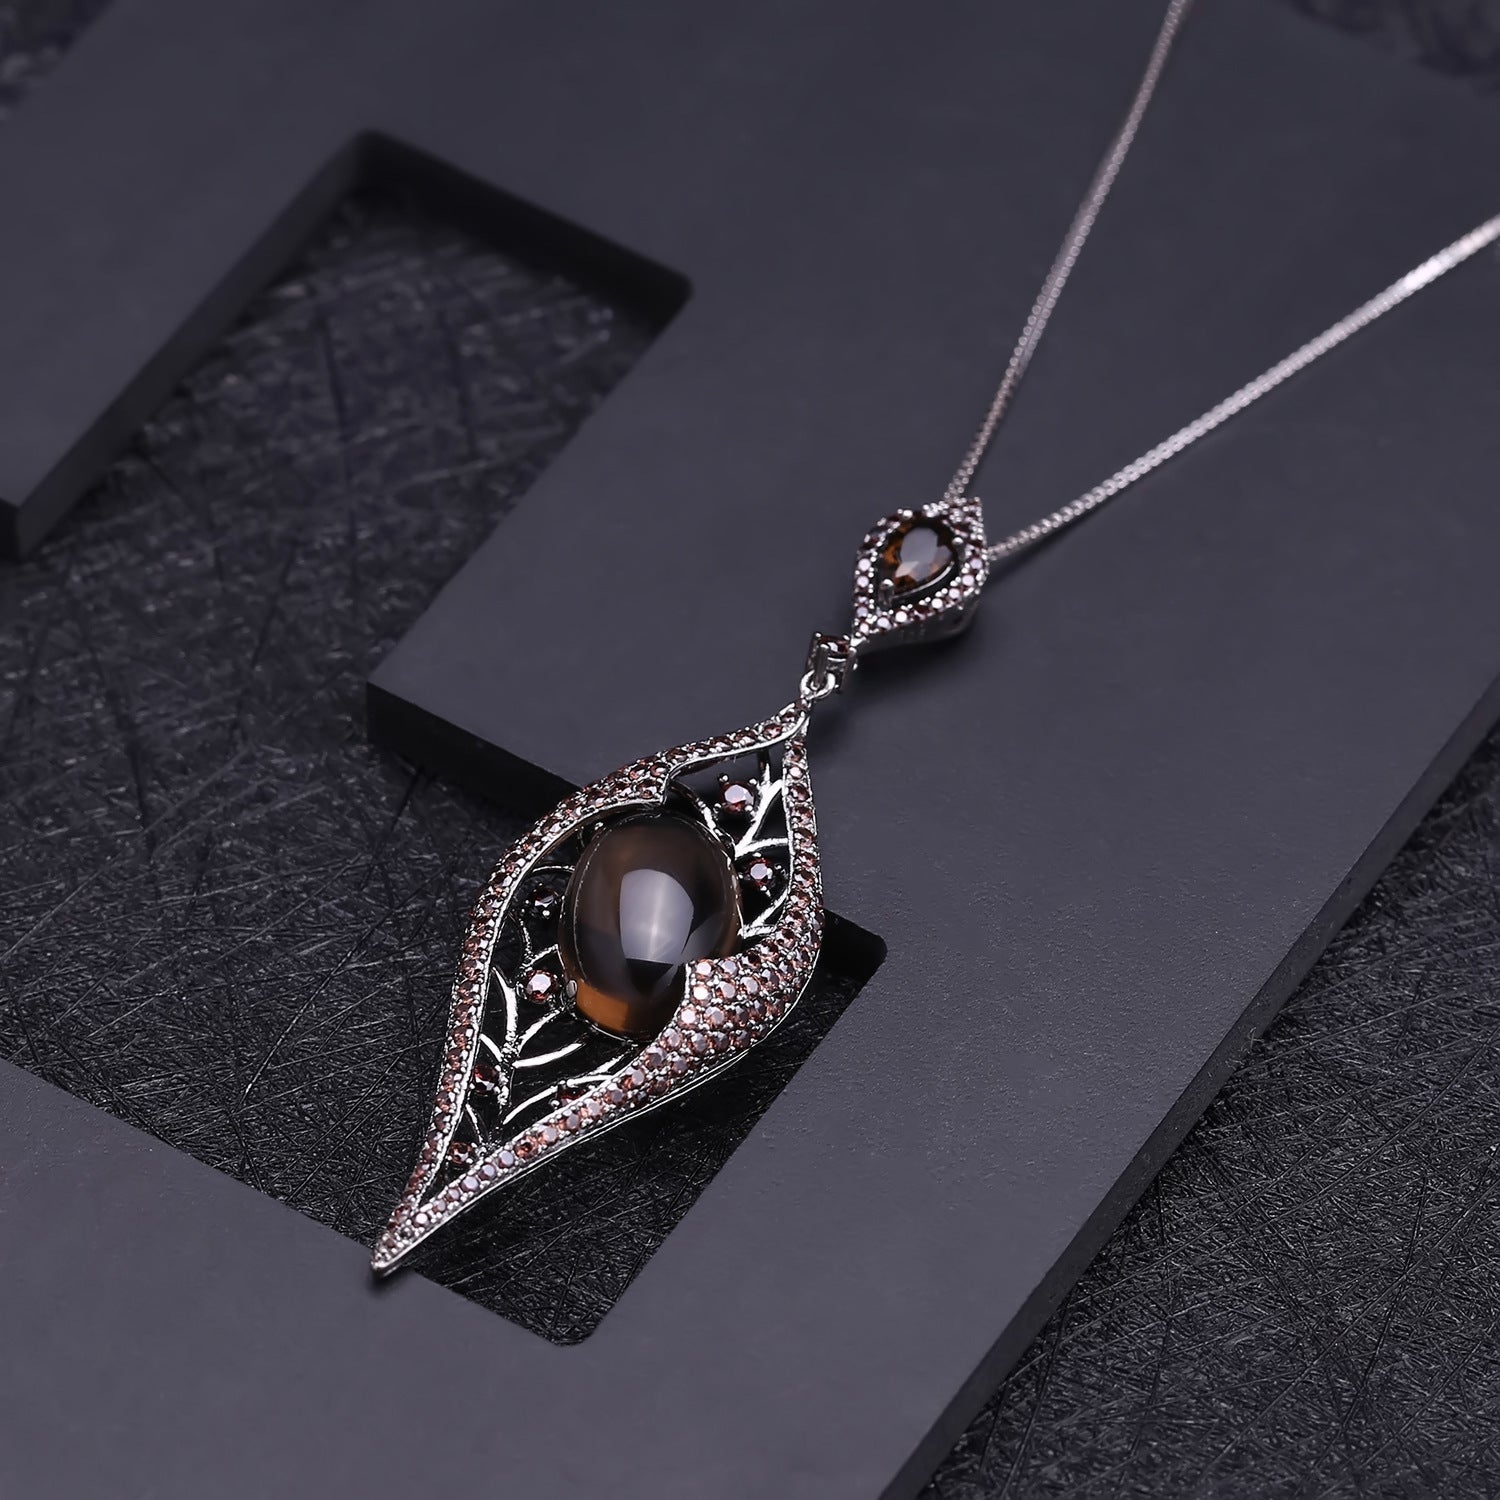 Italian Craft Design Vintage Luxury Jewelry Natural Tea Crystal Pendant Silver Necklace for Women